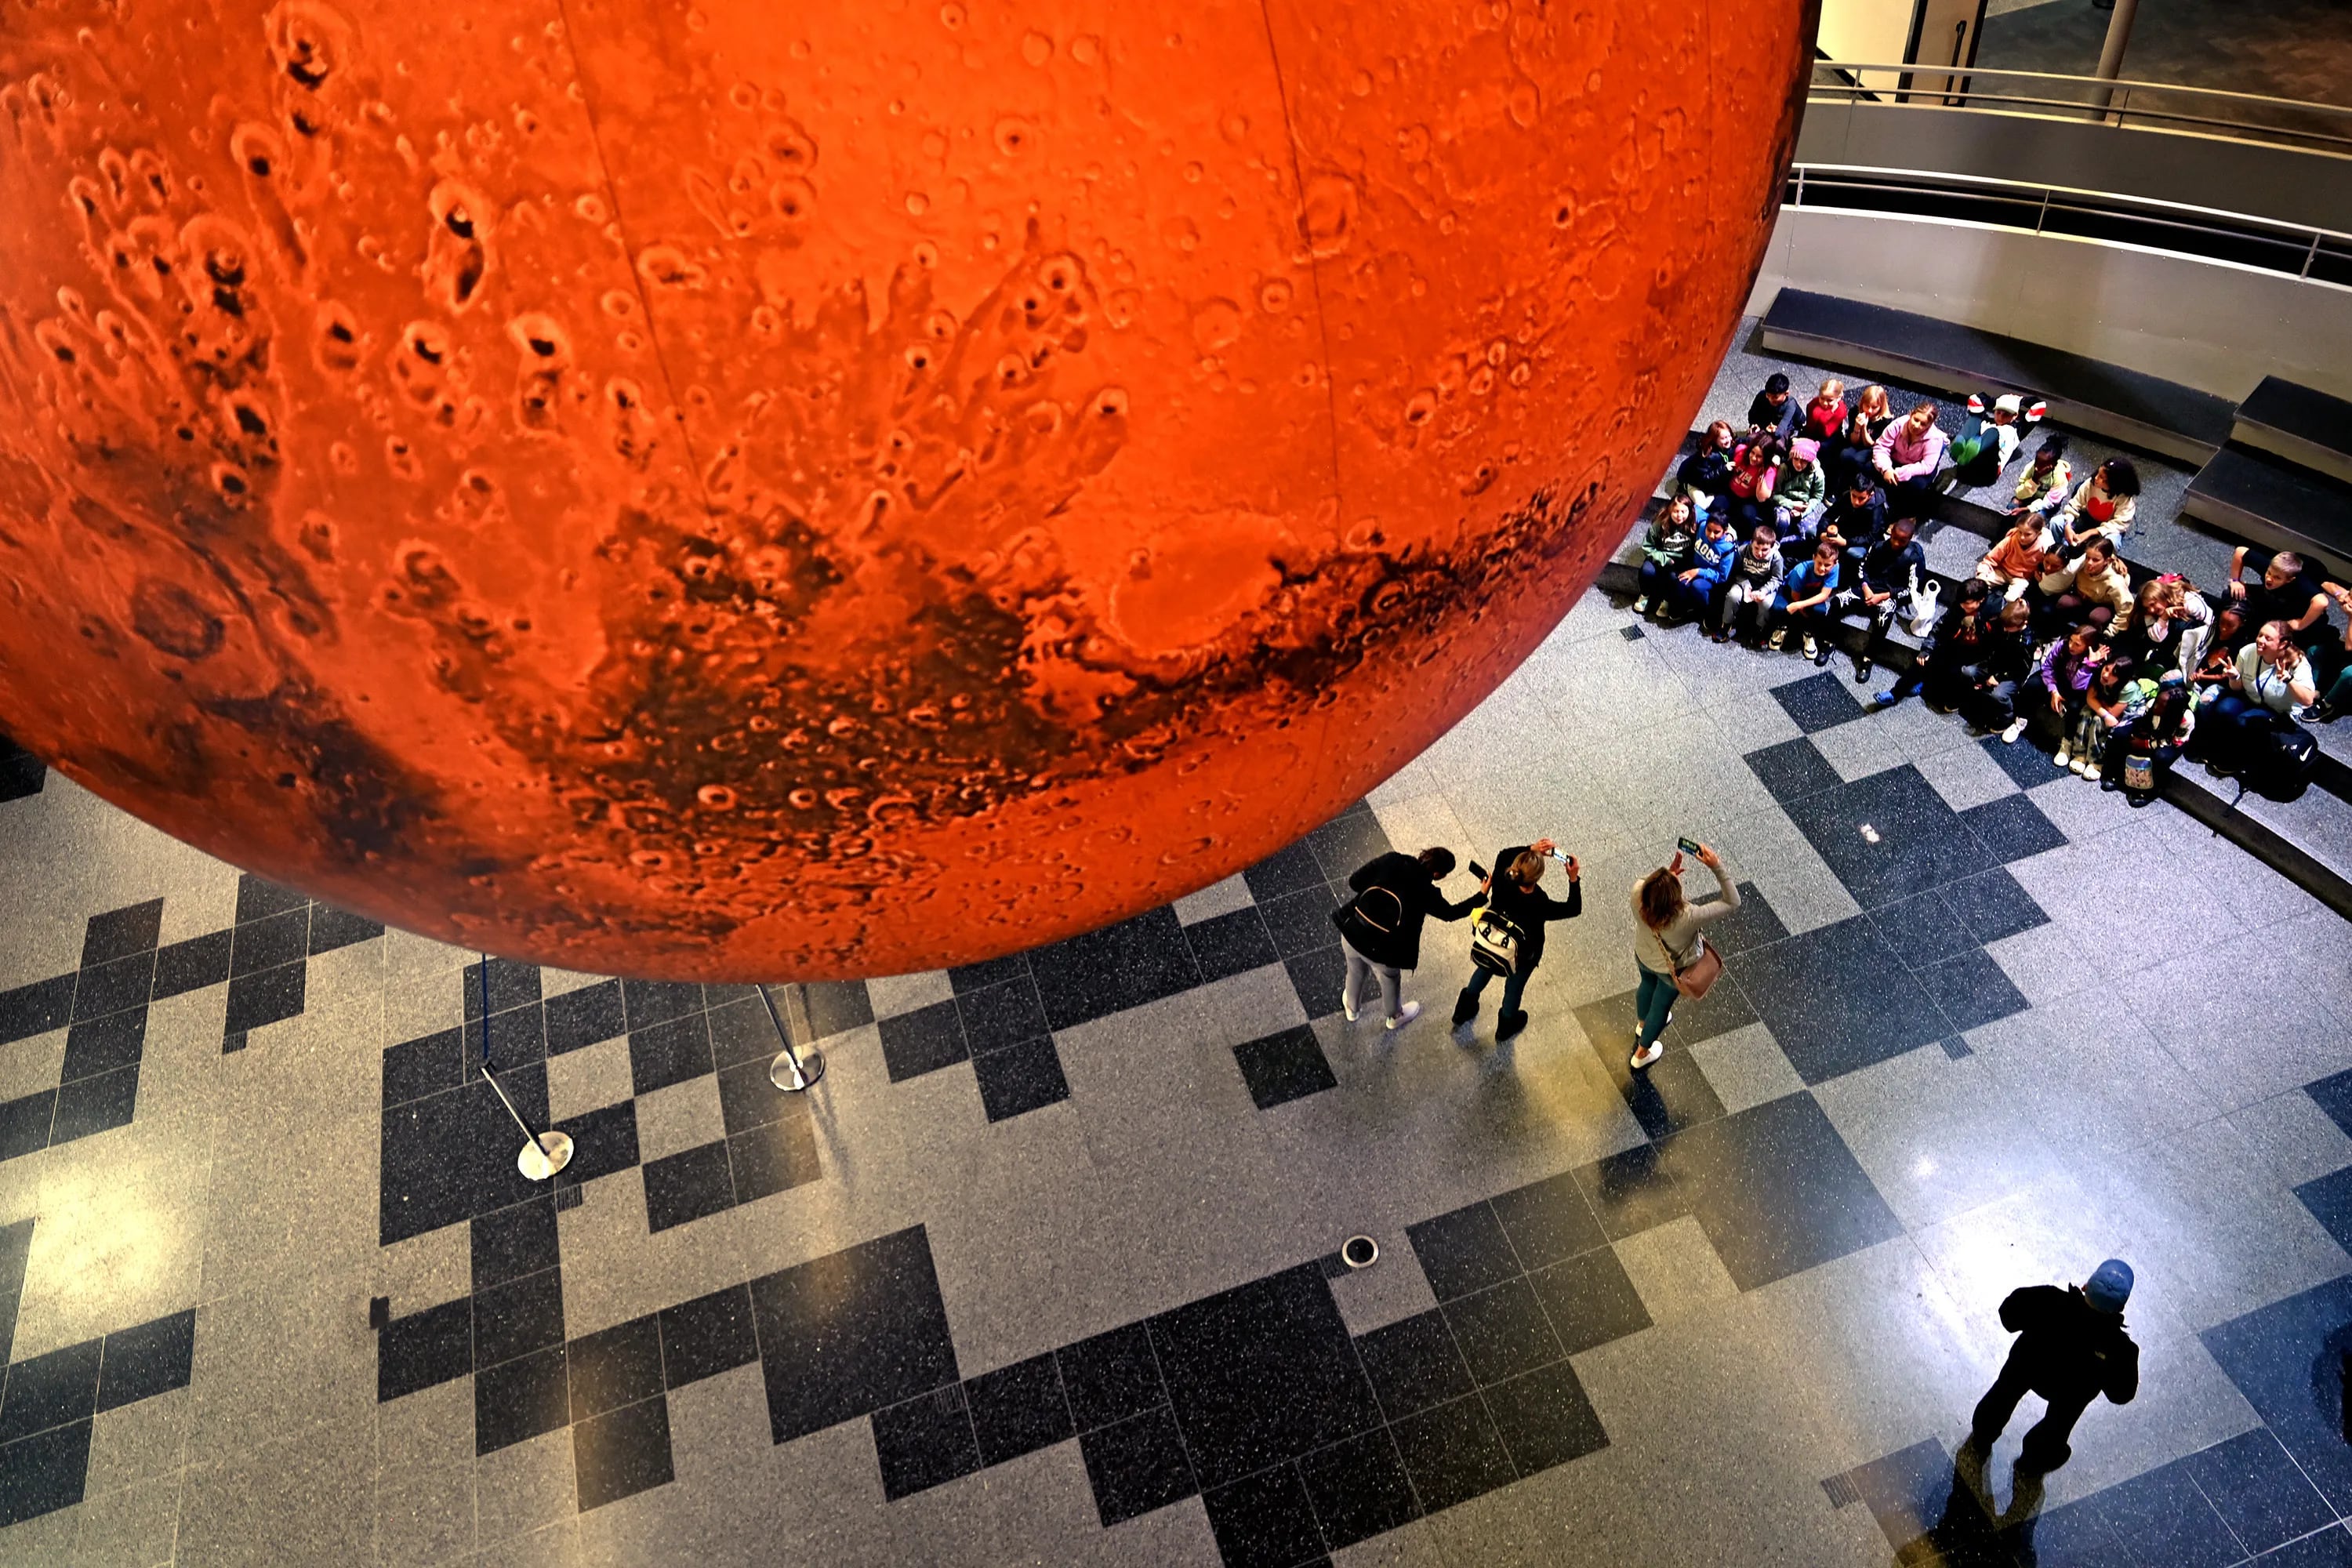 A 23 feet diameter and an approximate scale of 1:1 million, artwork of Mars by Luke Jerram brings the Red Planet close to visitors in the main lobby of the Franklin Institute Thursday, Nov. 2, 2023, as Wonderous Space  the museum’s new permanent exhibit about space exploration readies for its opening this weekend.The Mars installation uses imagery from NASA’s Mars Reconnaissance Orbiter data.